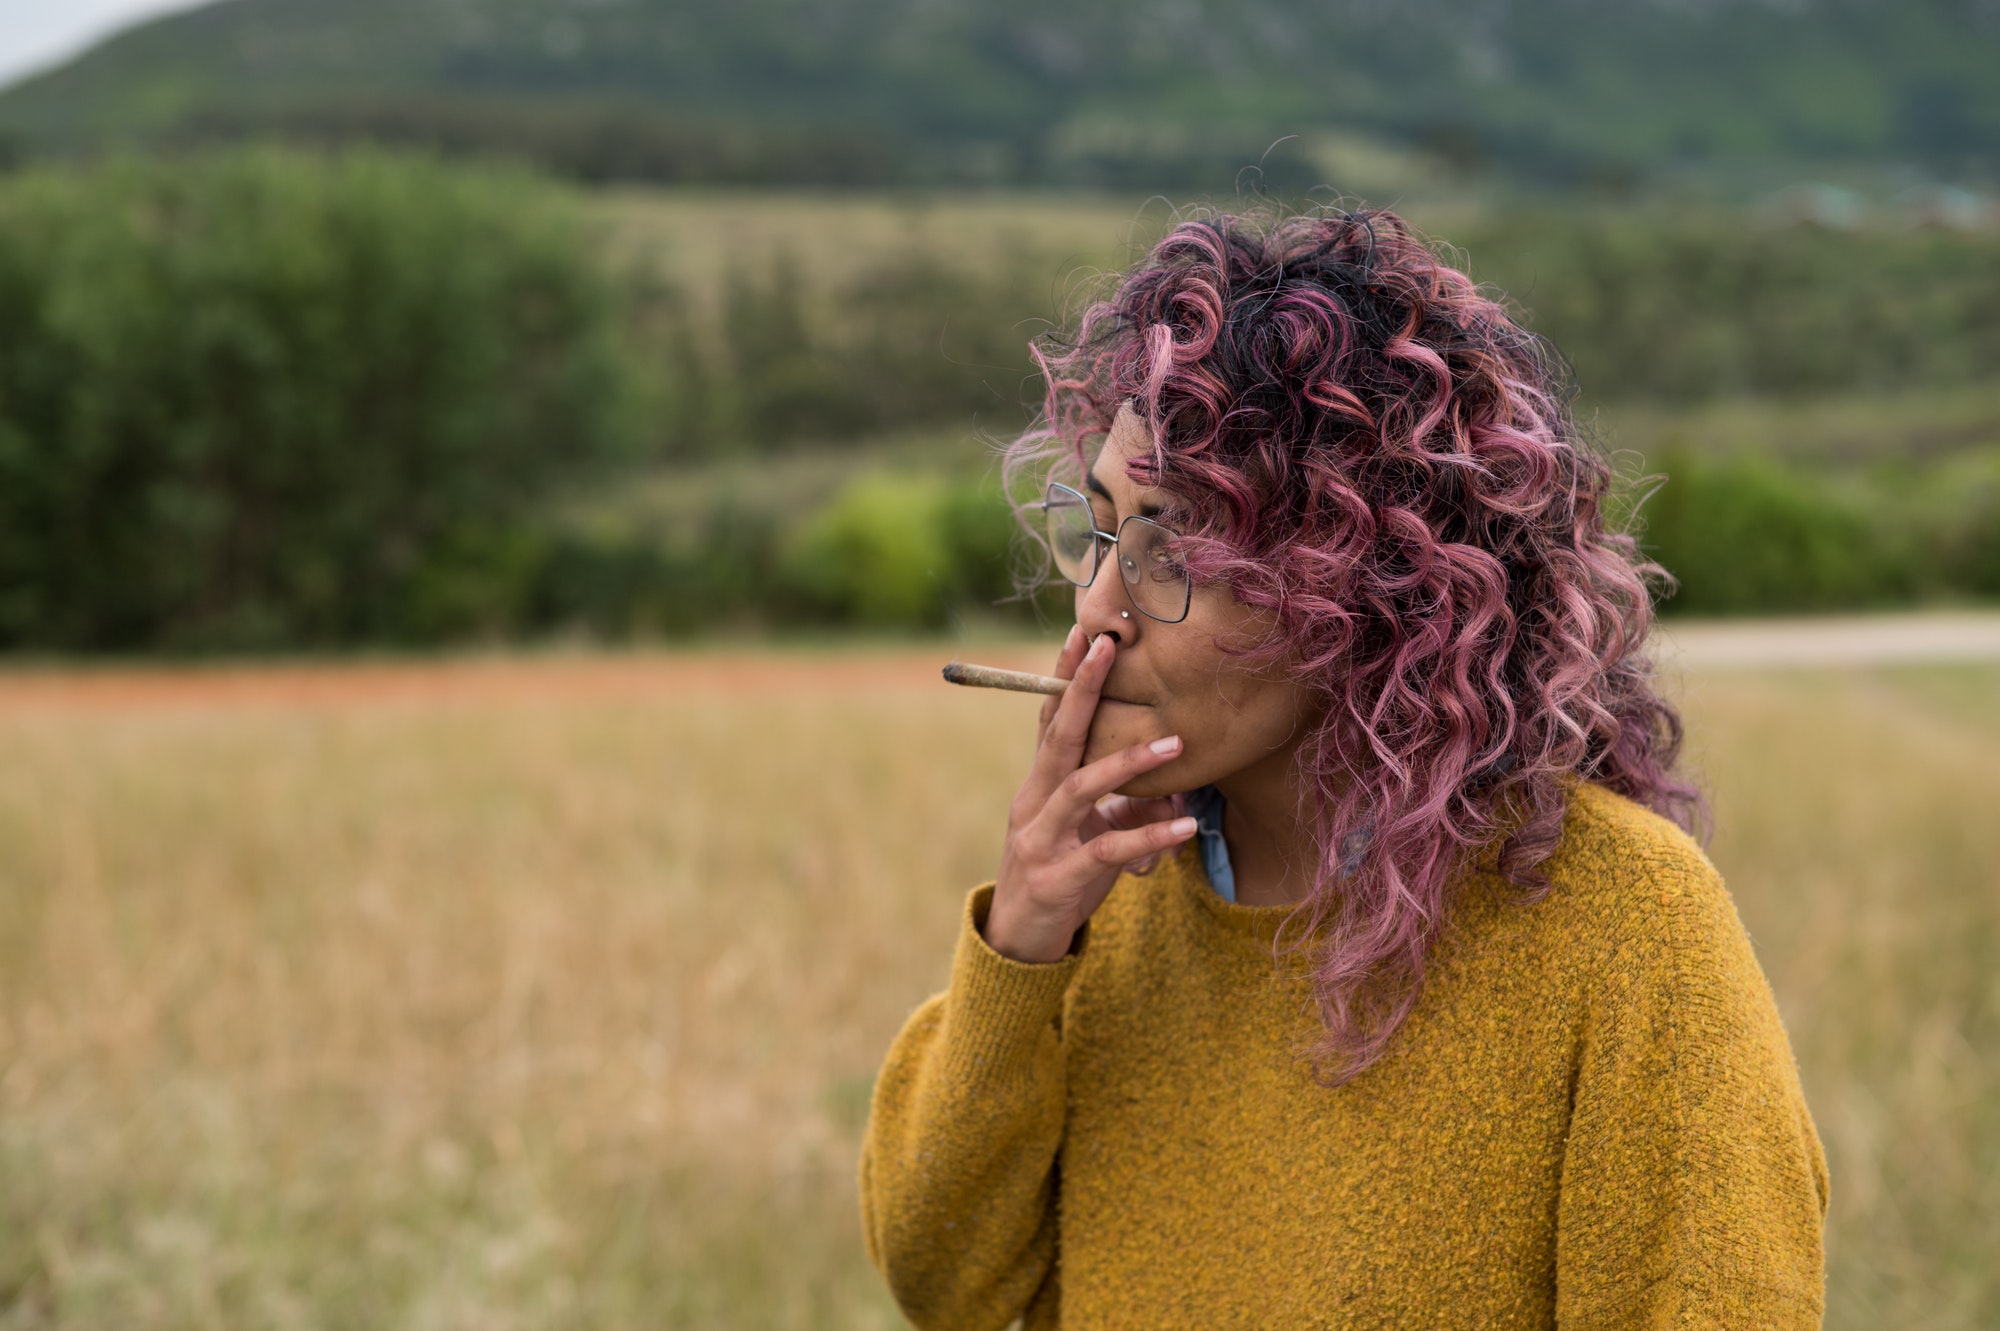 Portrait of woman standing and smoking a cannabis joint